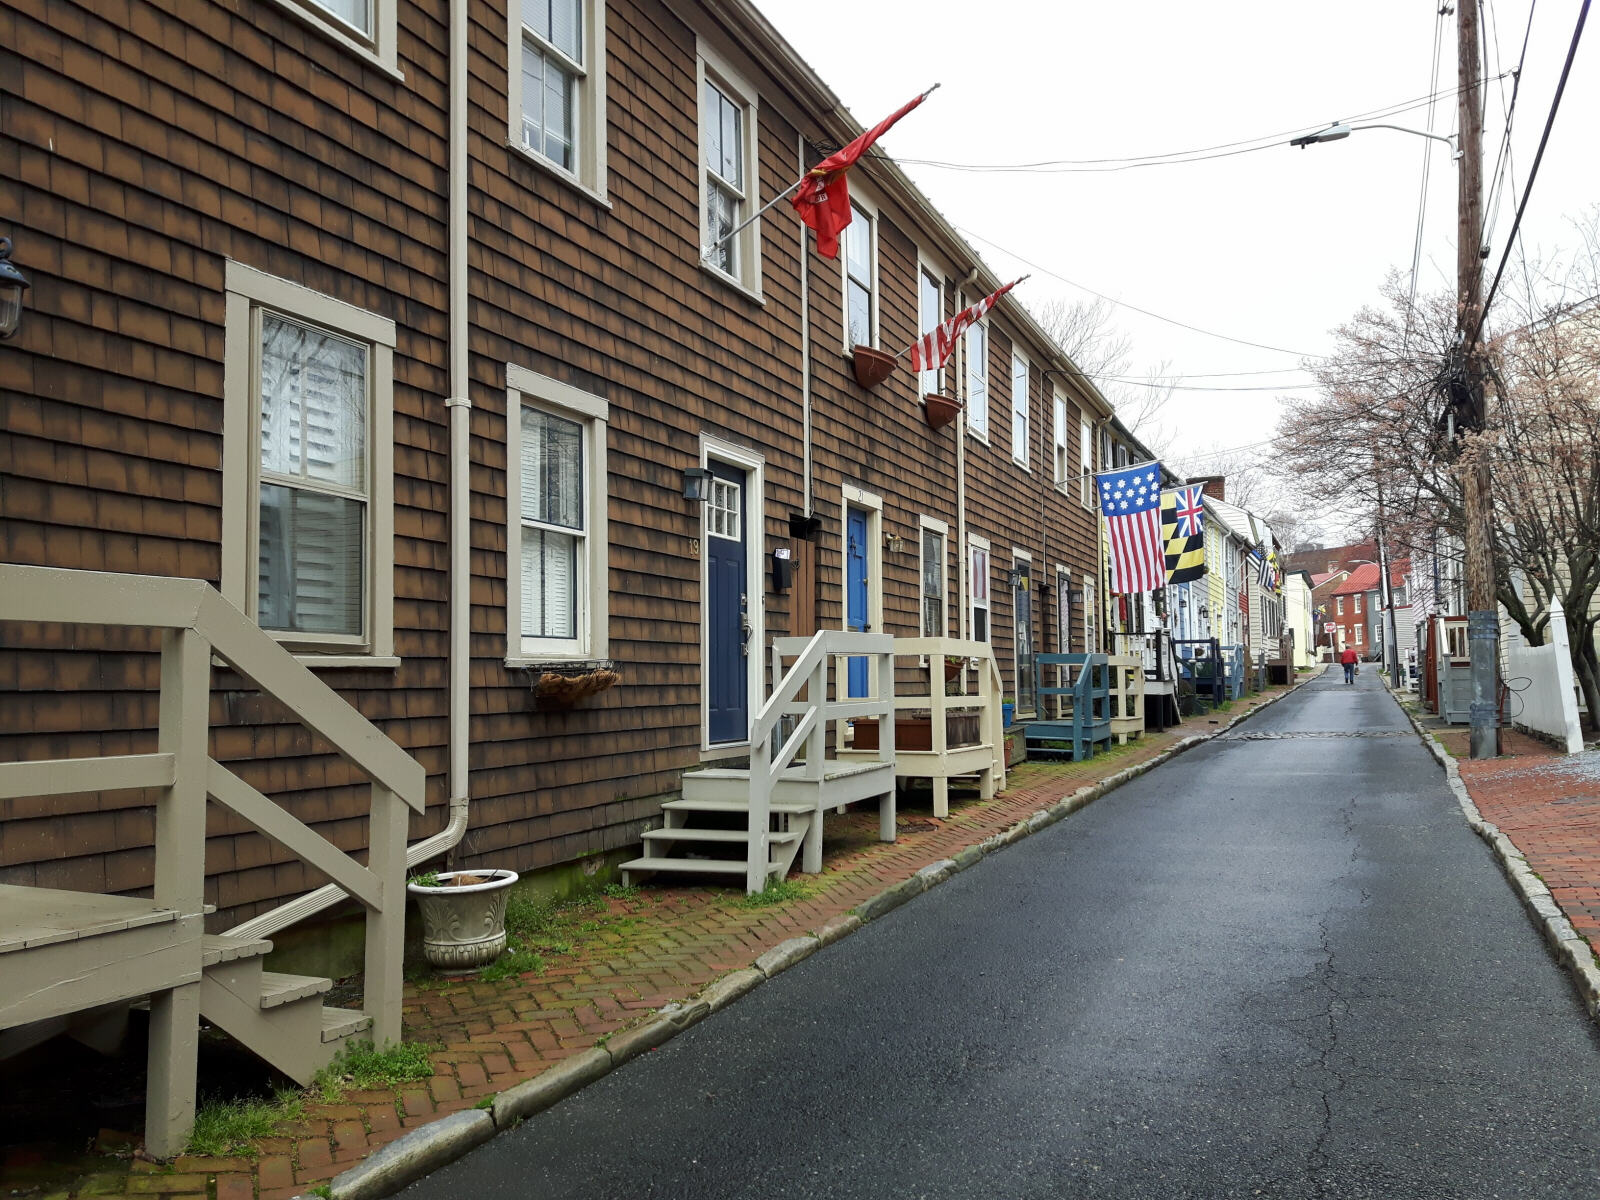 Clapboard houses in Annapolis, Maryland